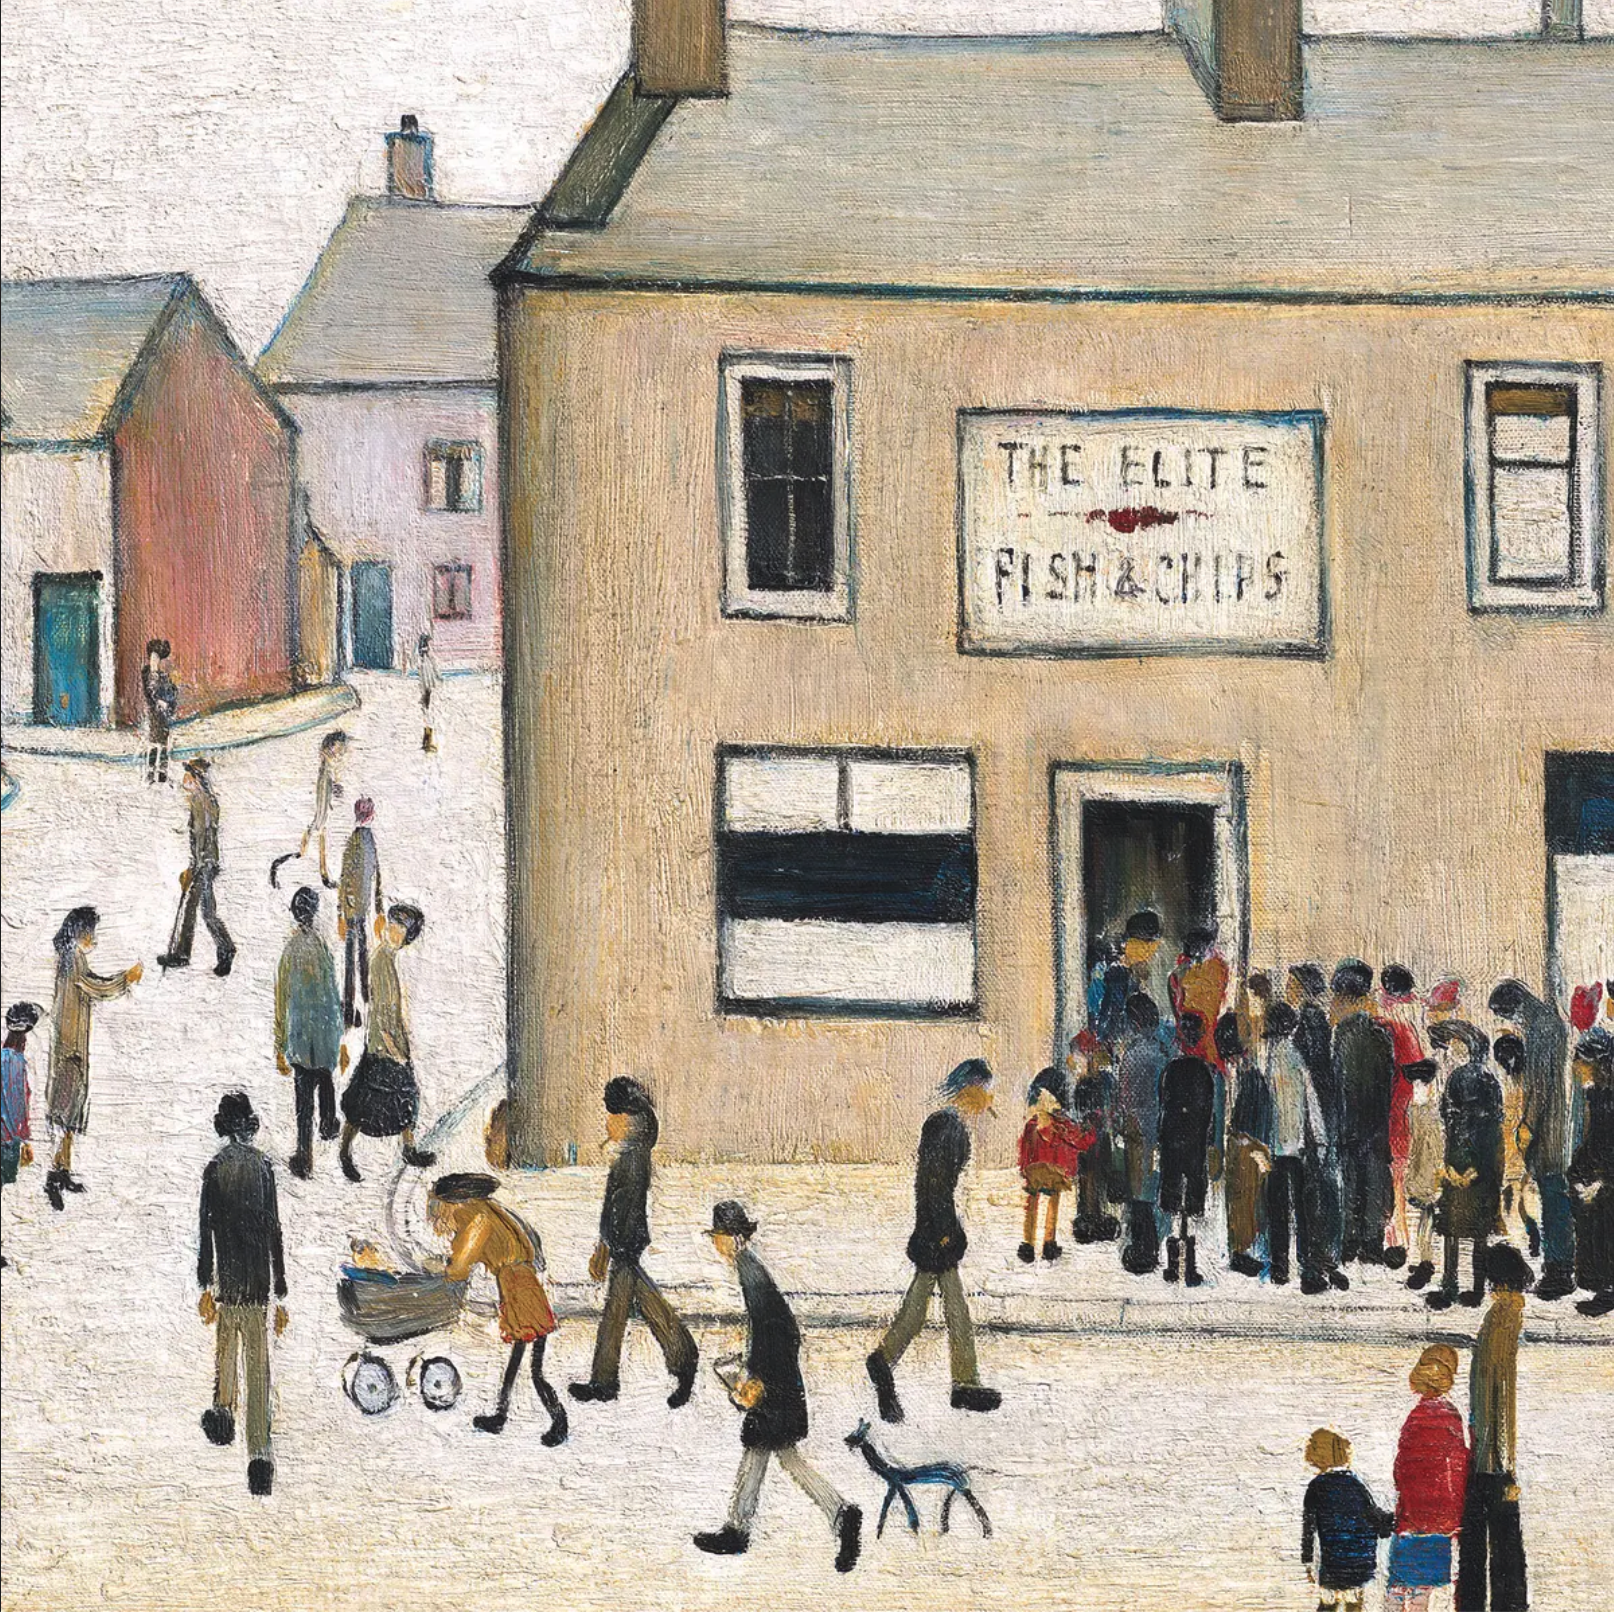 The Elite Fish & Chip Shop (1949) by Laurence Stephen Lowry (1887 - 1976), English artist.